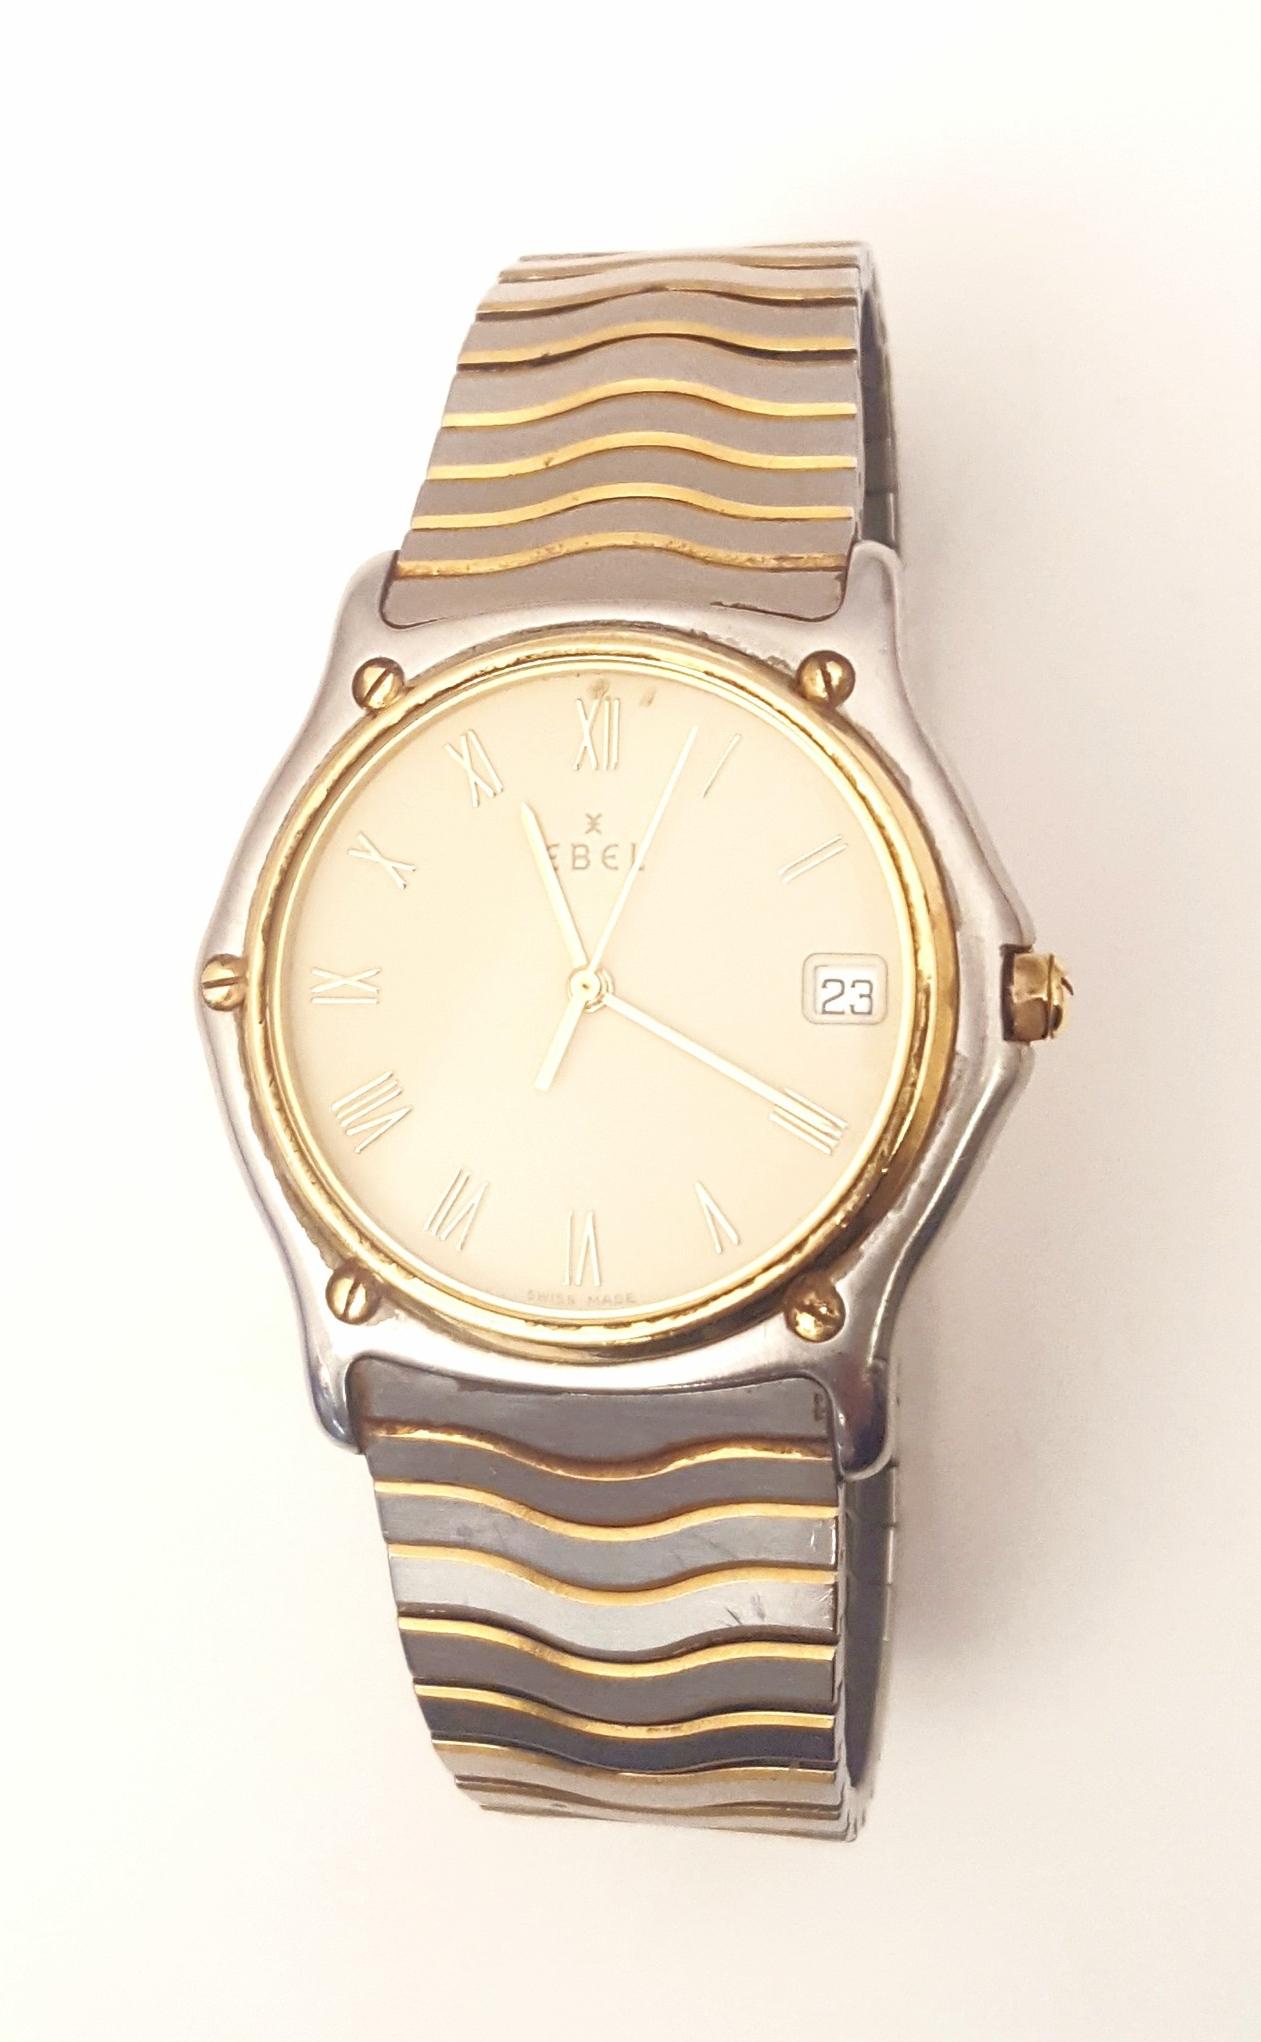 A fabulous Ebel watch suitable for men or women who are wearing larger watches!  Swiss made, sapphire crystal, case measures 37mm, Roman numerals on champagne dial, sweep second hand, deployment clasp, date window.  Named Wave after the bracelet